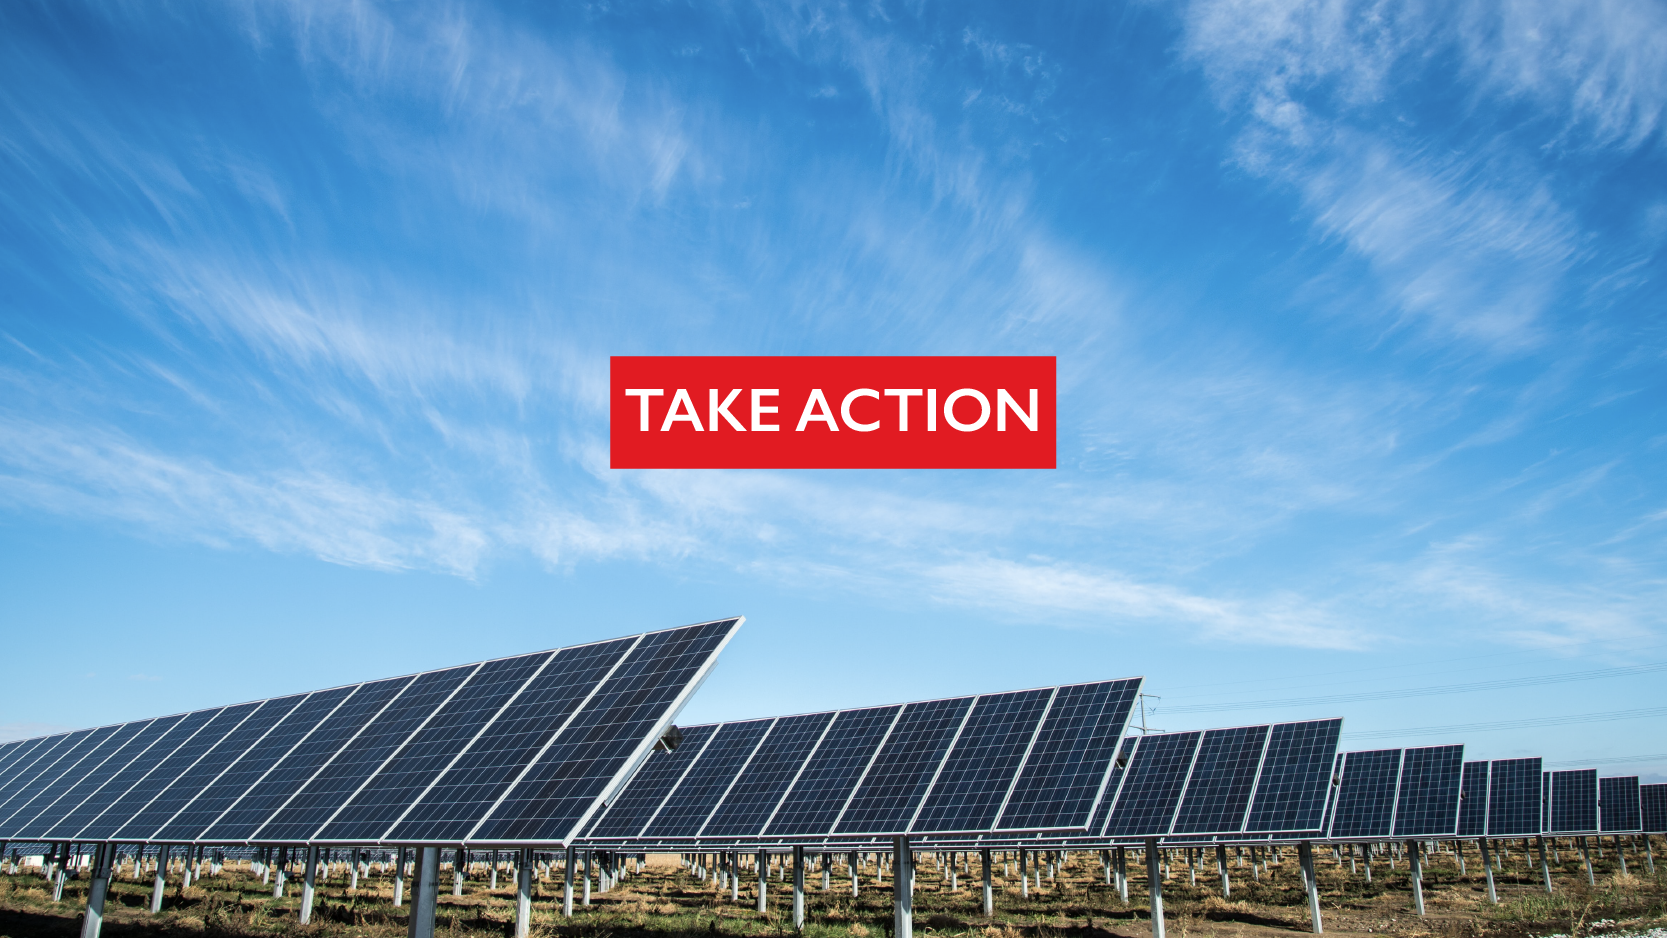 TAKE ACTION: Keep LPEA Moving Towards Clean Energy